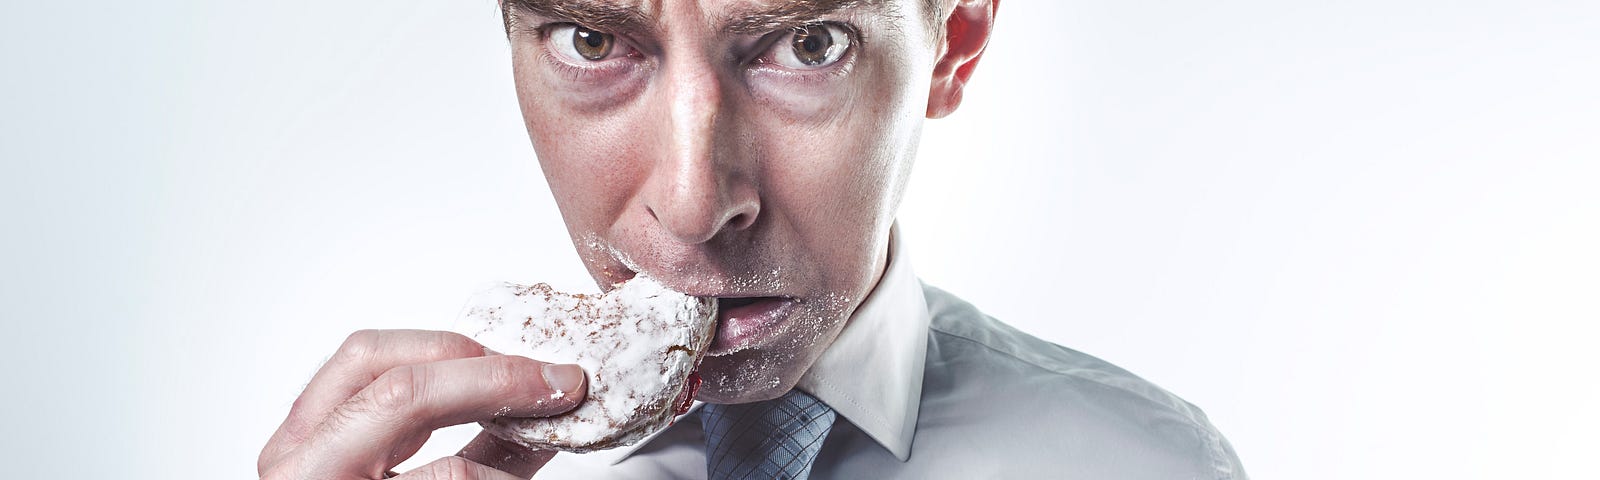 A white man wearing a white shirt and tie, taking a bit from a donut. He has a look of “I’m not sure about this” on his face, while the jelly filling has landed on his tie..